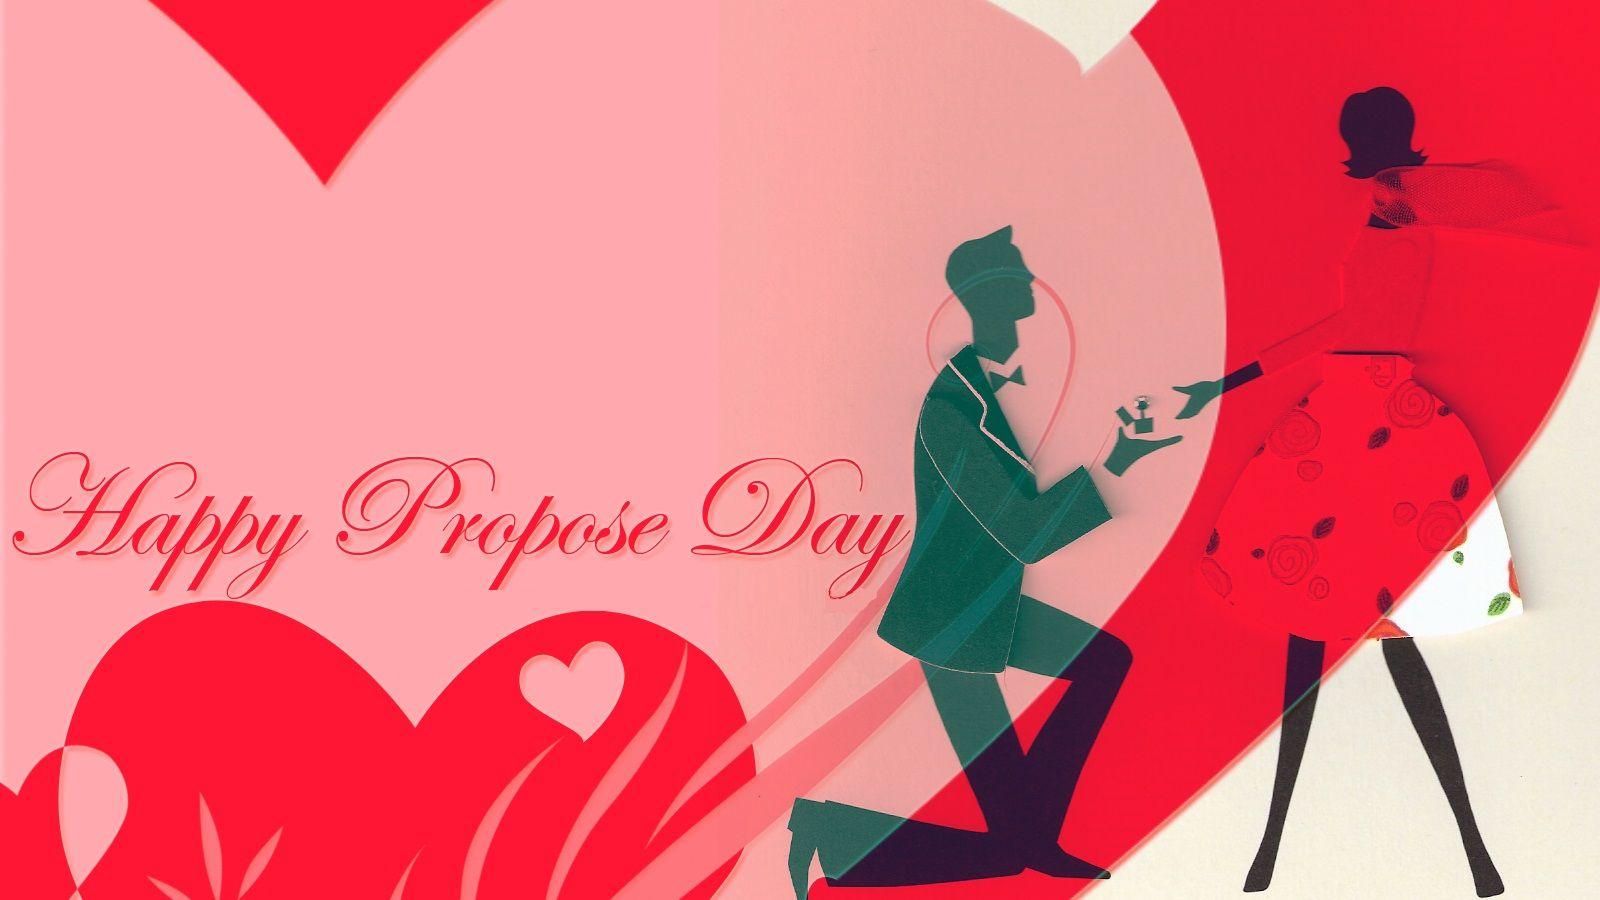 Happy Propose Day Whats App Status Wallpaper HD Free Download